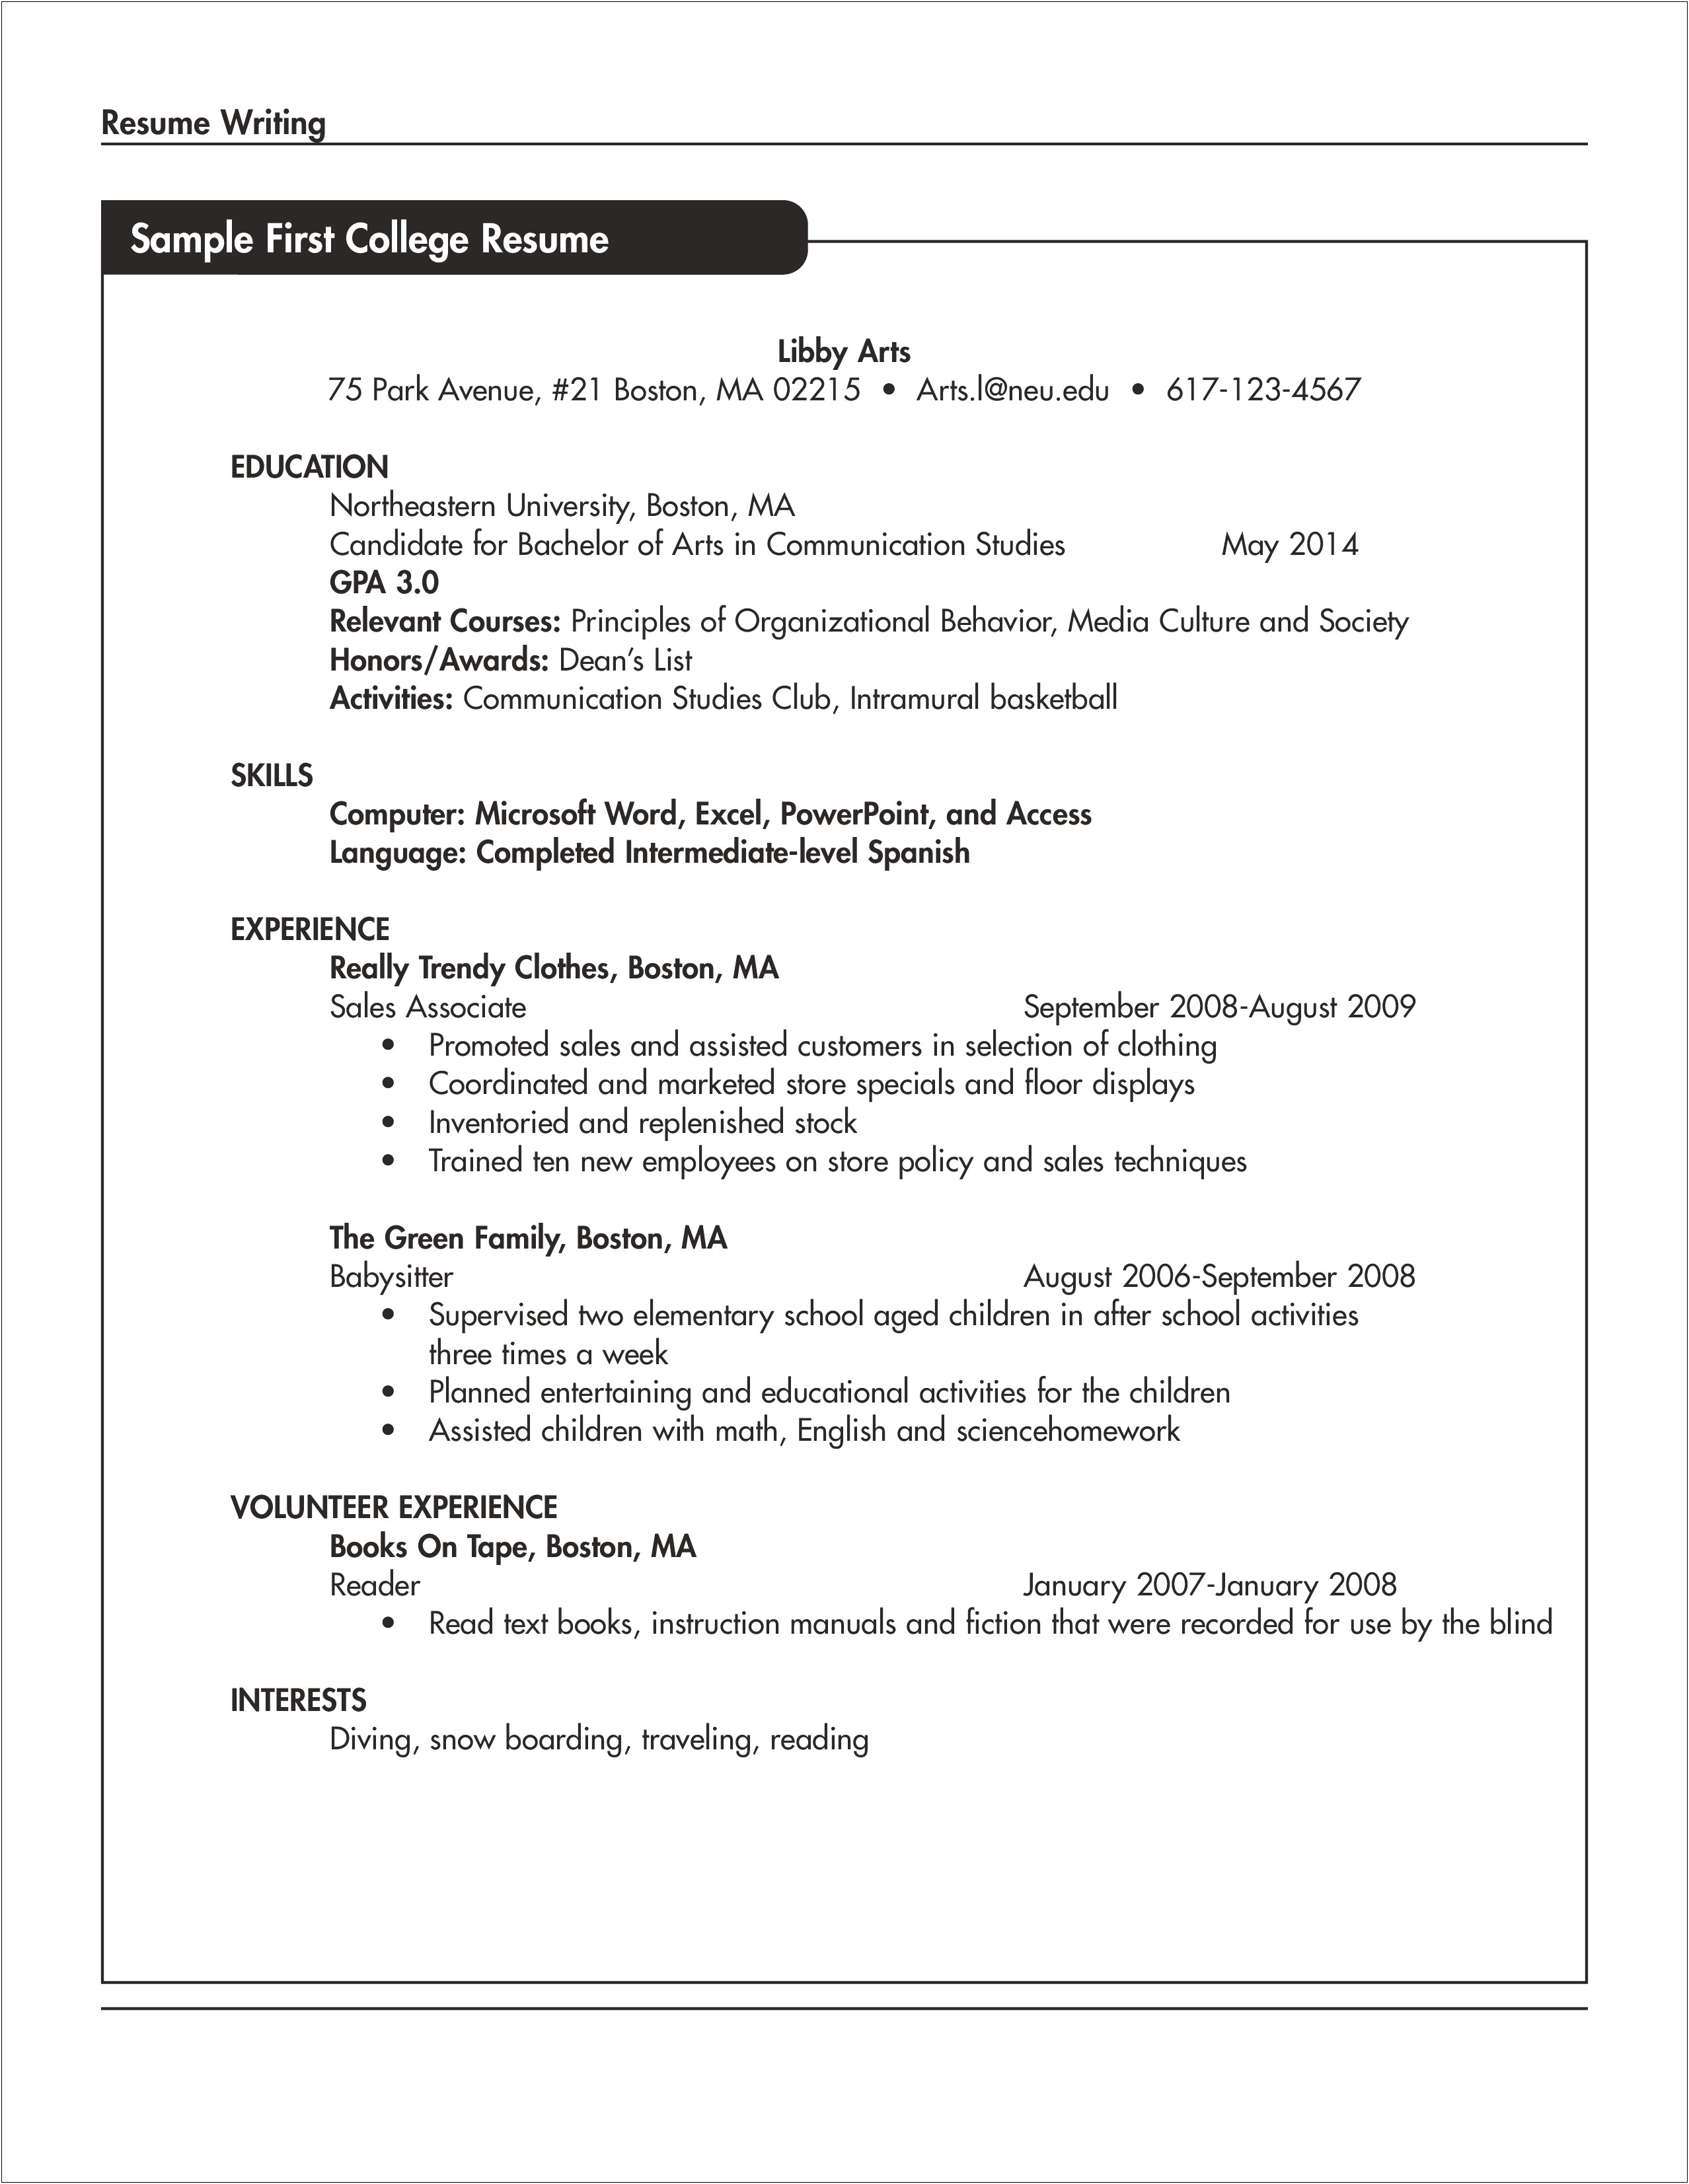 Employment Experience Example On Resume